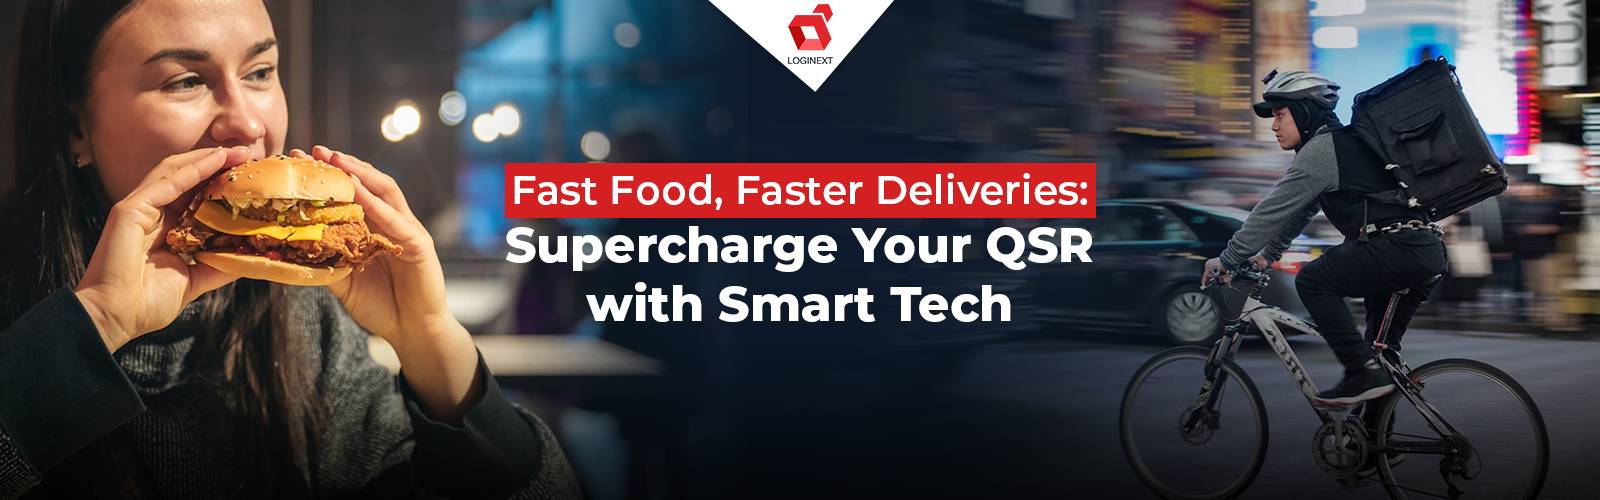 Supercharge QSR with Delivery Management System